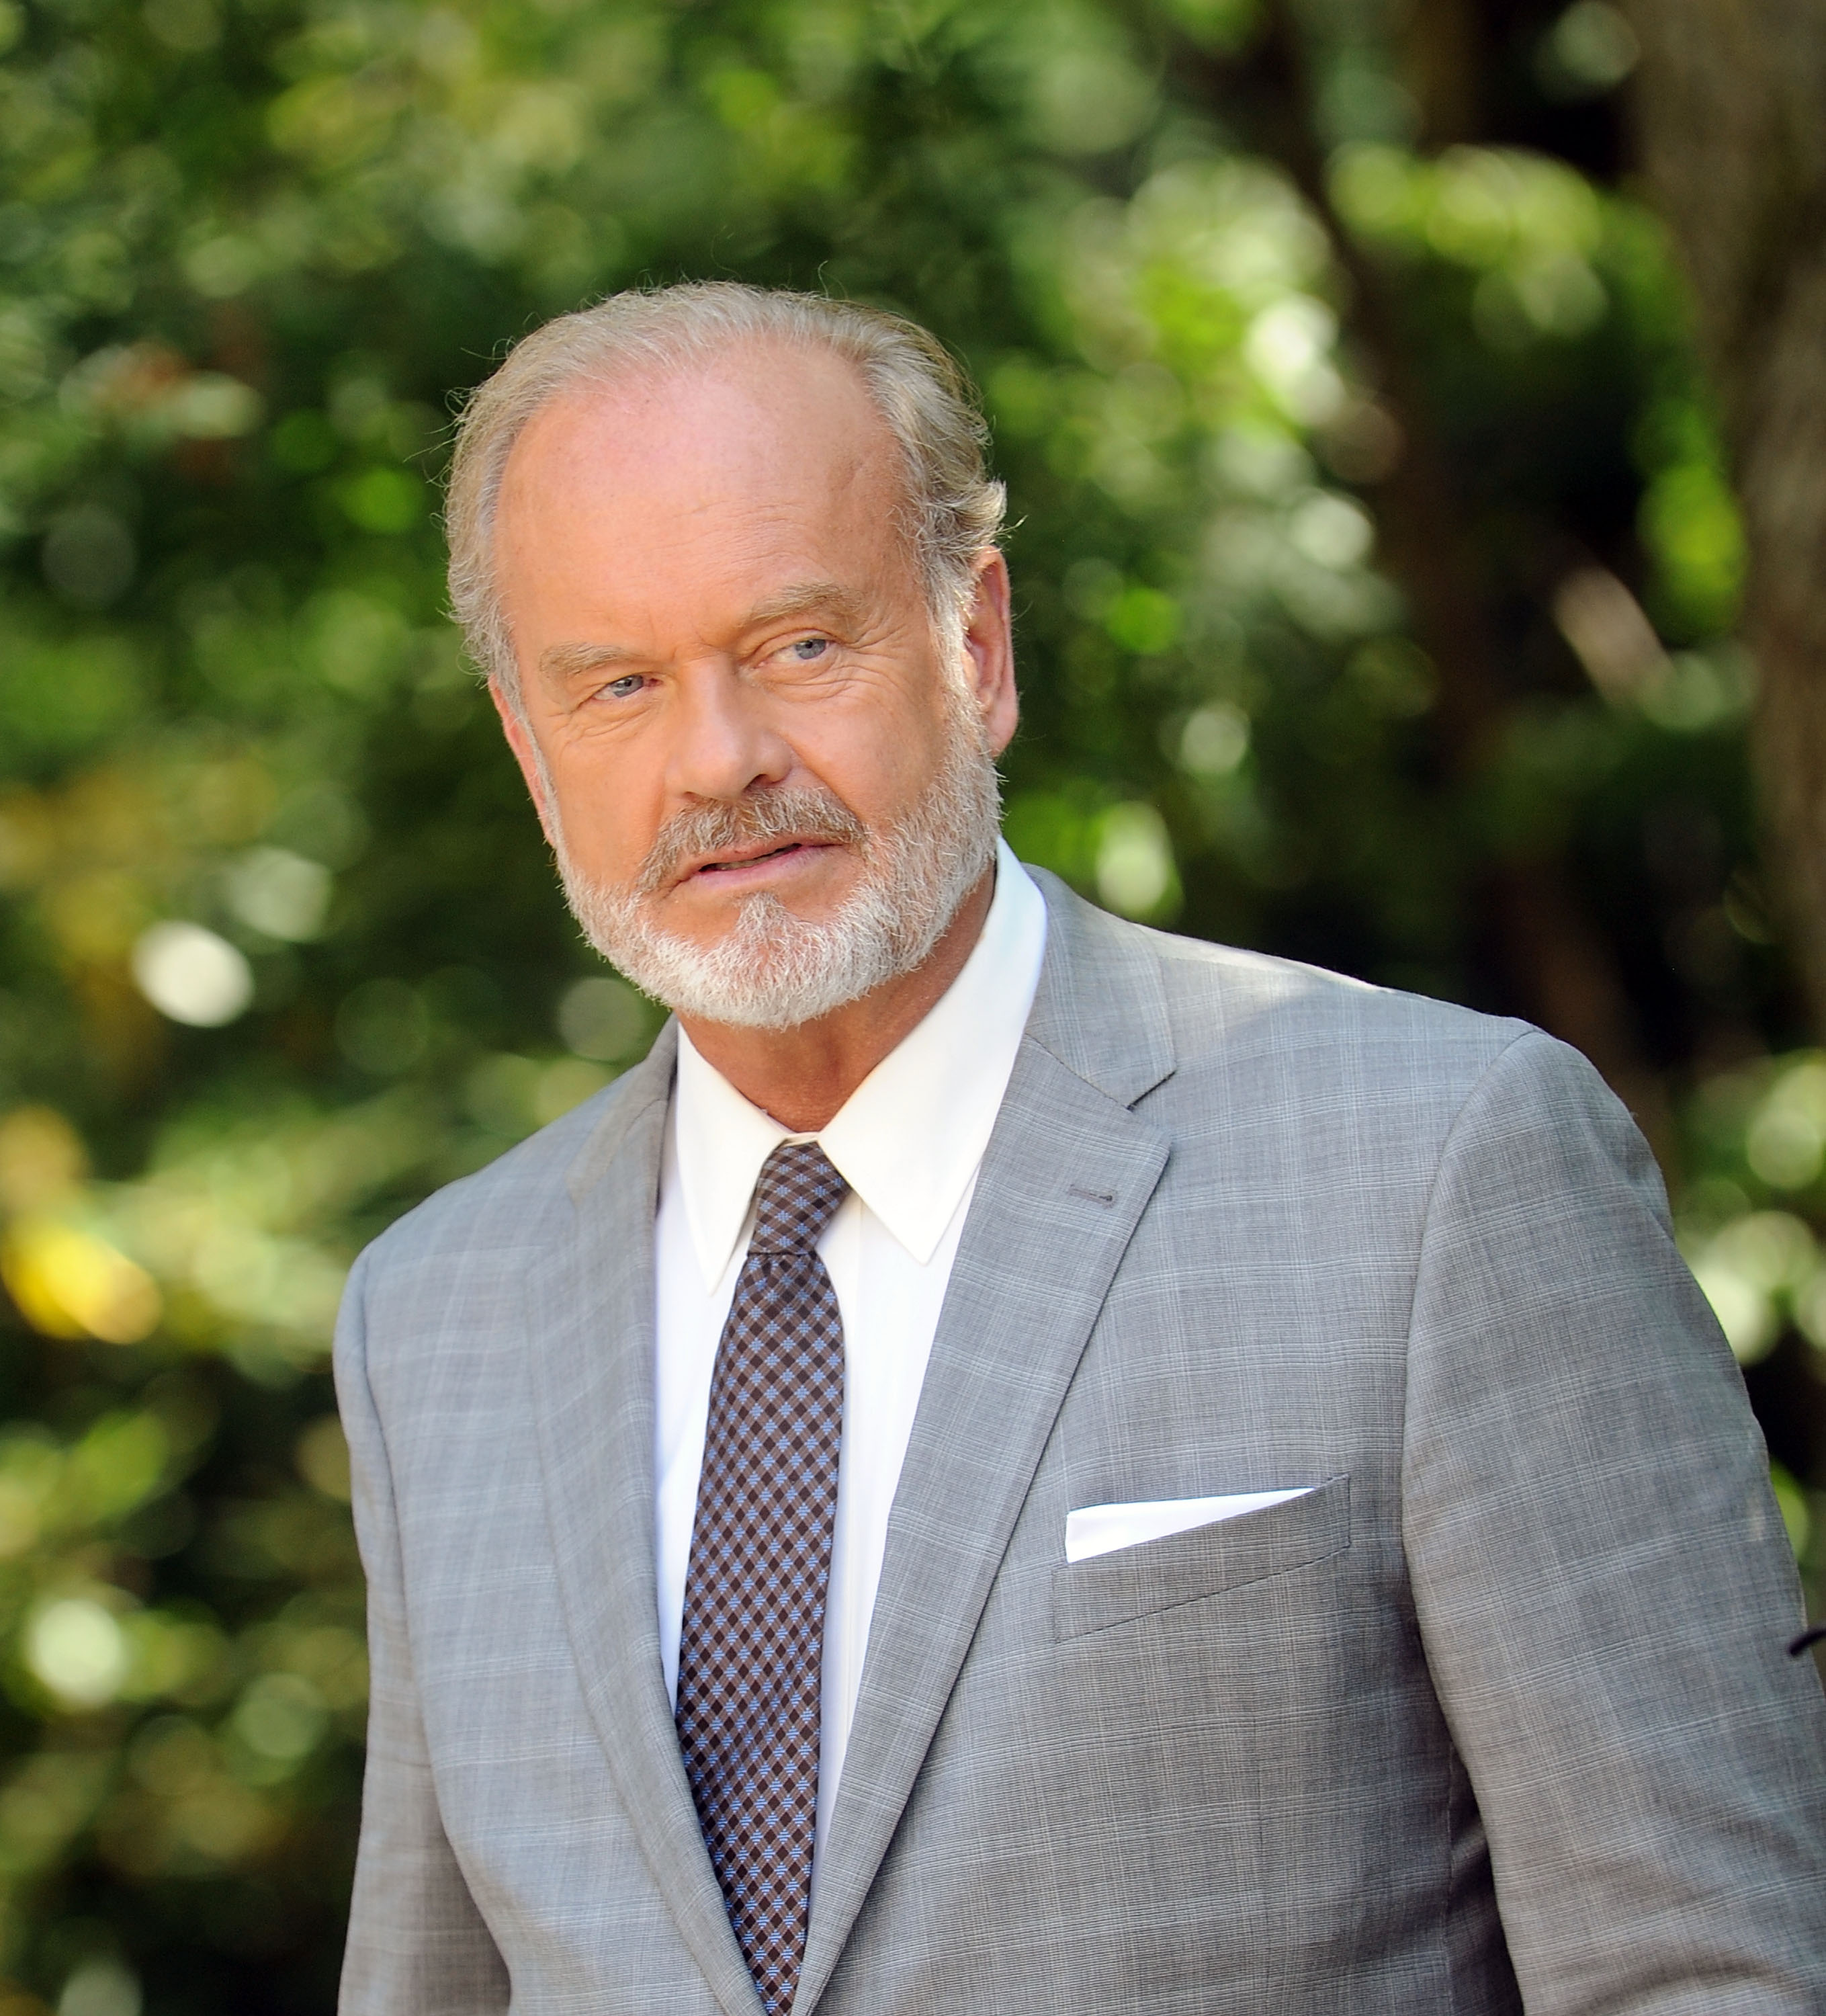 Kelsey Grammer on the set of "Like Father" on August 30, 2017, in New York City | Source: Getty Images